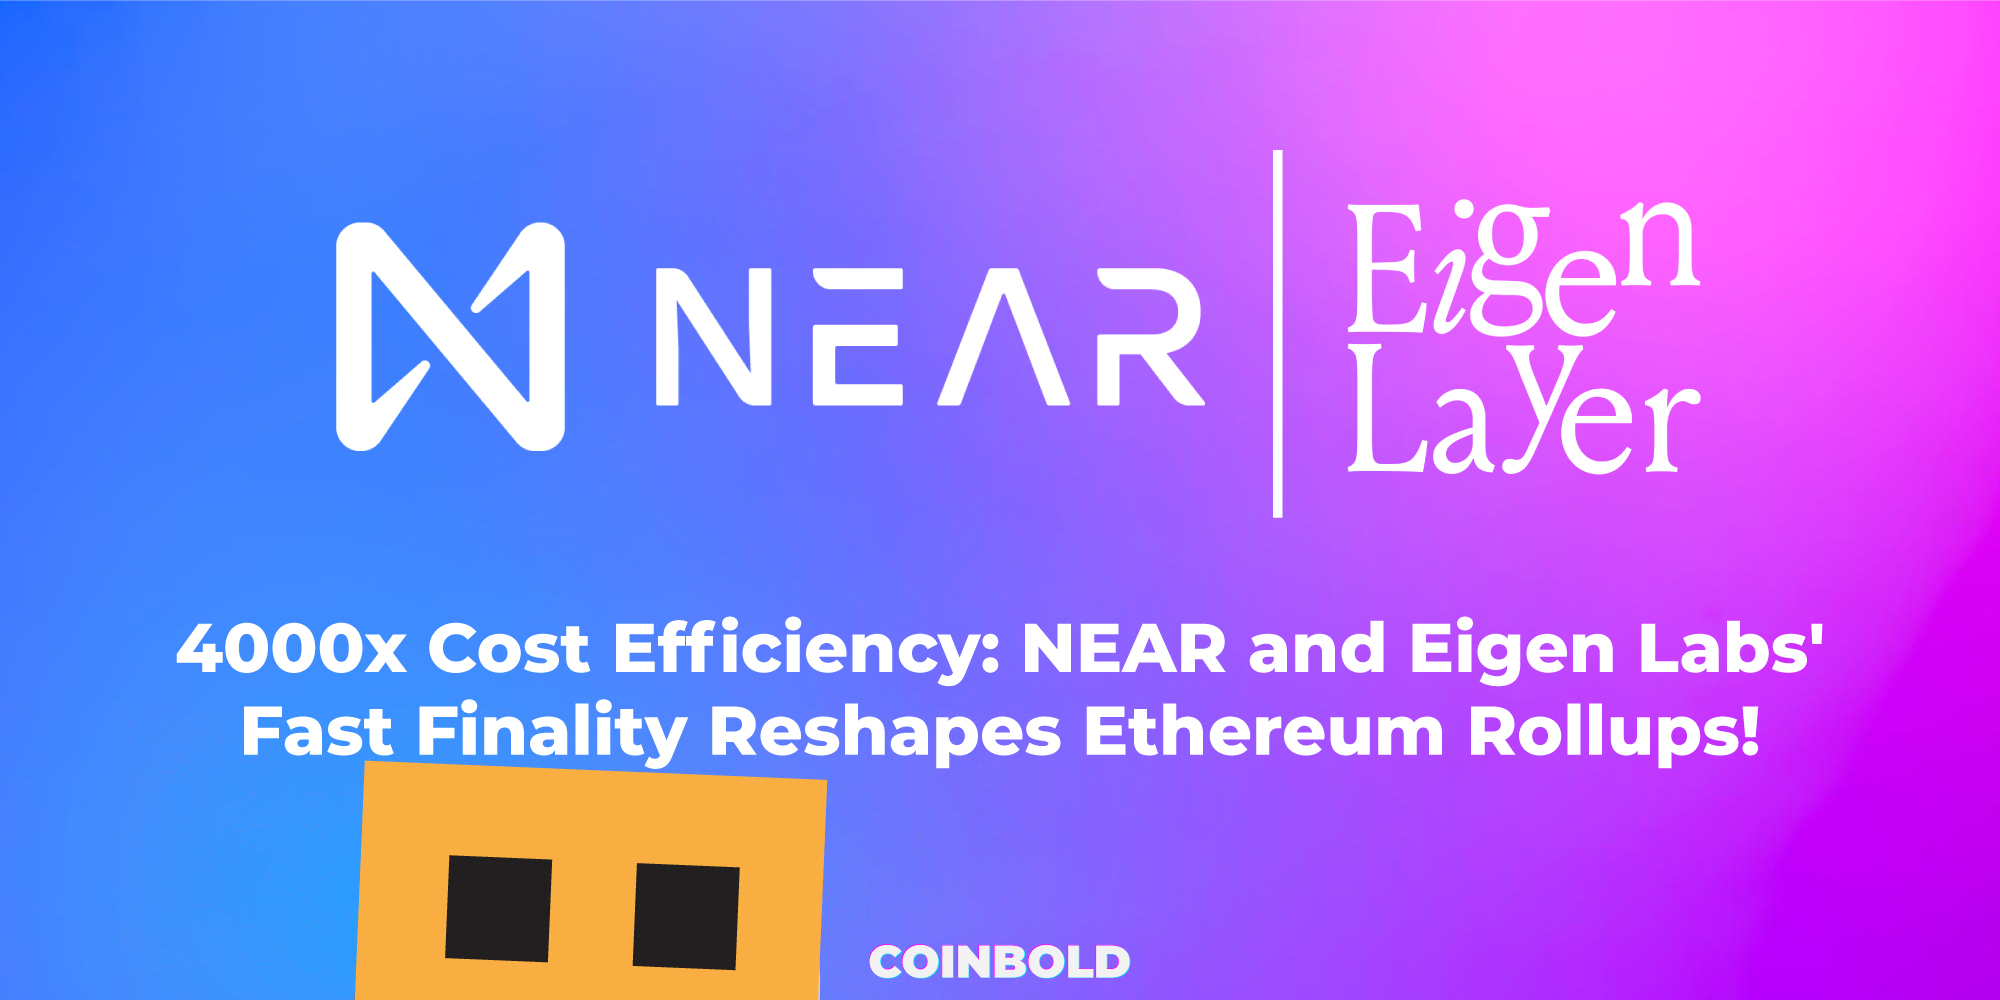 4000x Cost Efficiency: NEAR and Eigen Labs’ Fast Finality Reshapes Ethereum Rollups!